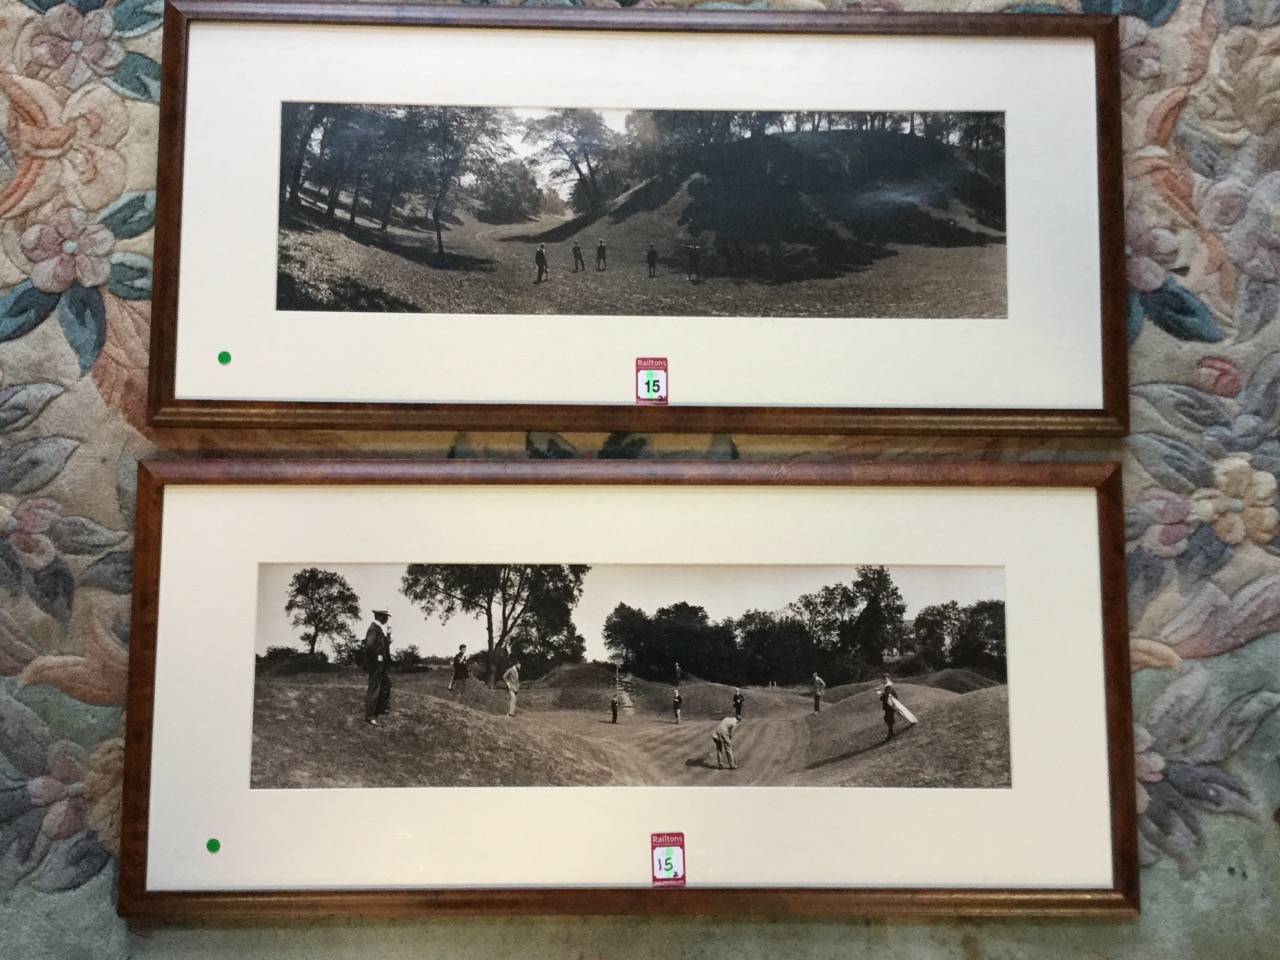 A pair of monochrome wide-angled photographs of golfers from the Edwardian era, the shadowed sepia